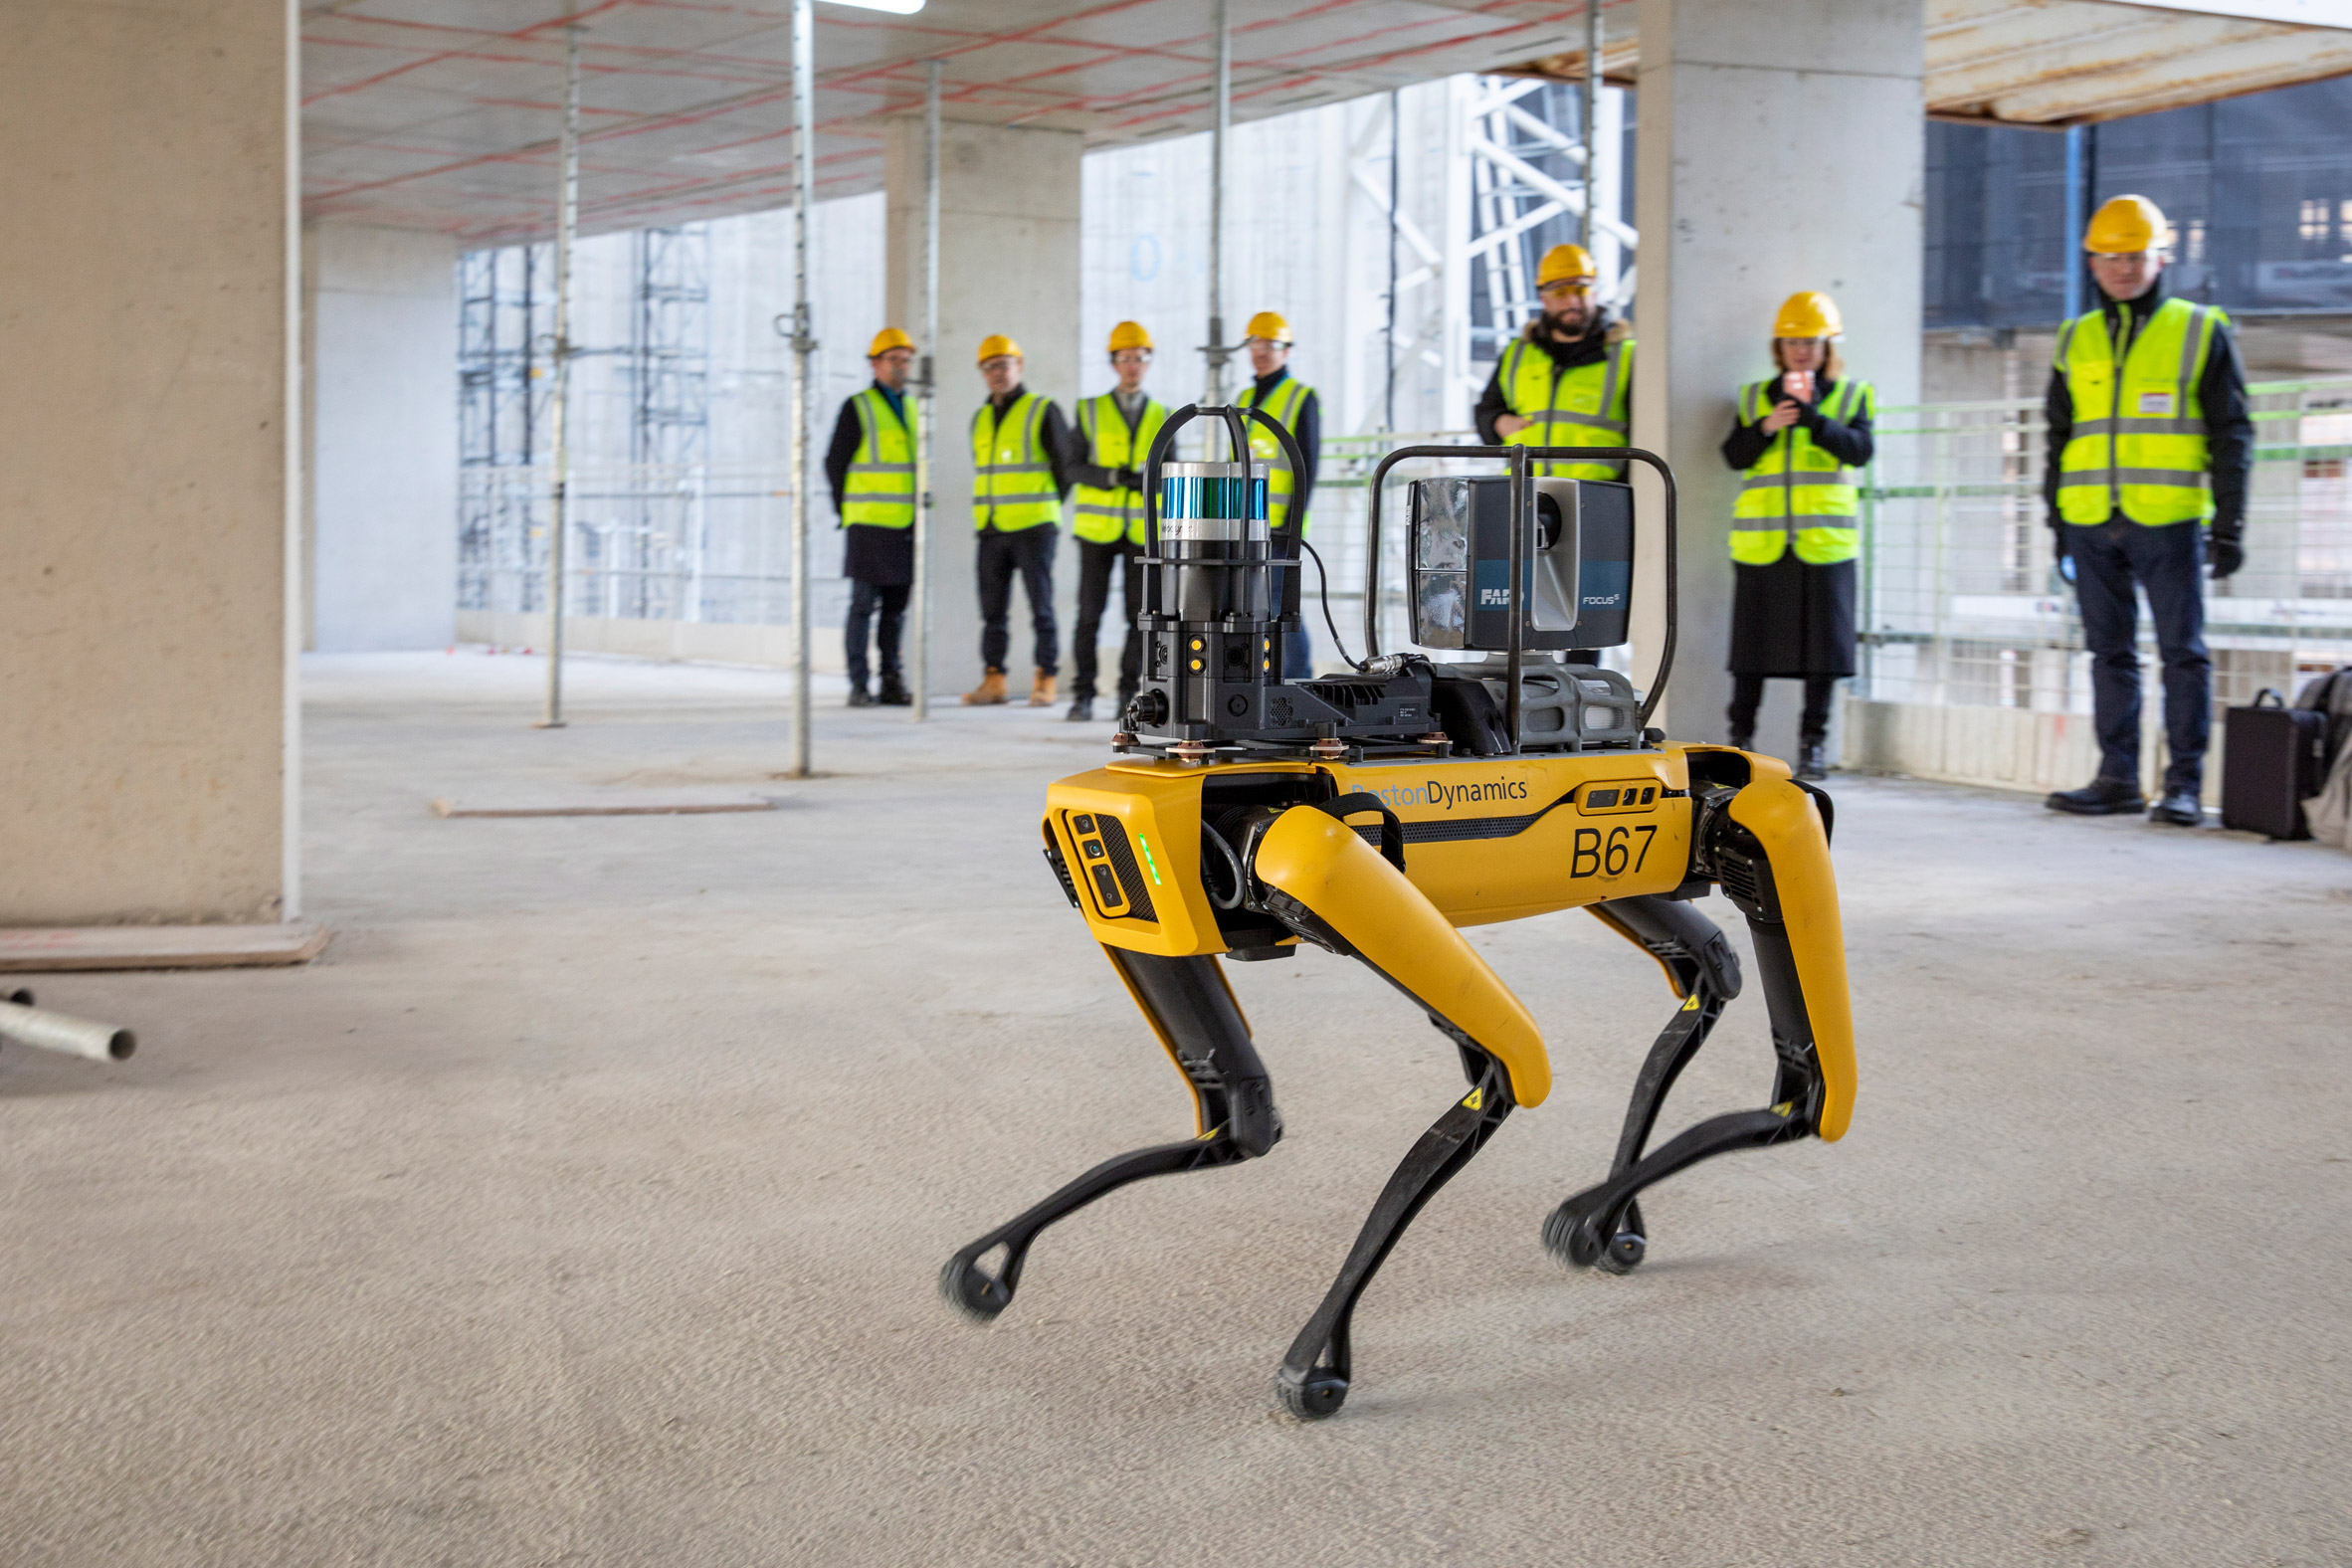 Boston Dynamic's Spot robot dog assists architecture firm Foster + Partners at Battersea Power Station